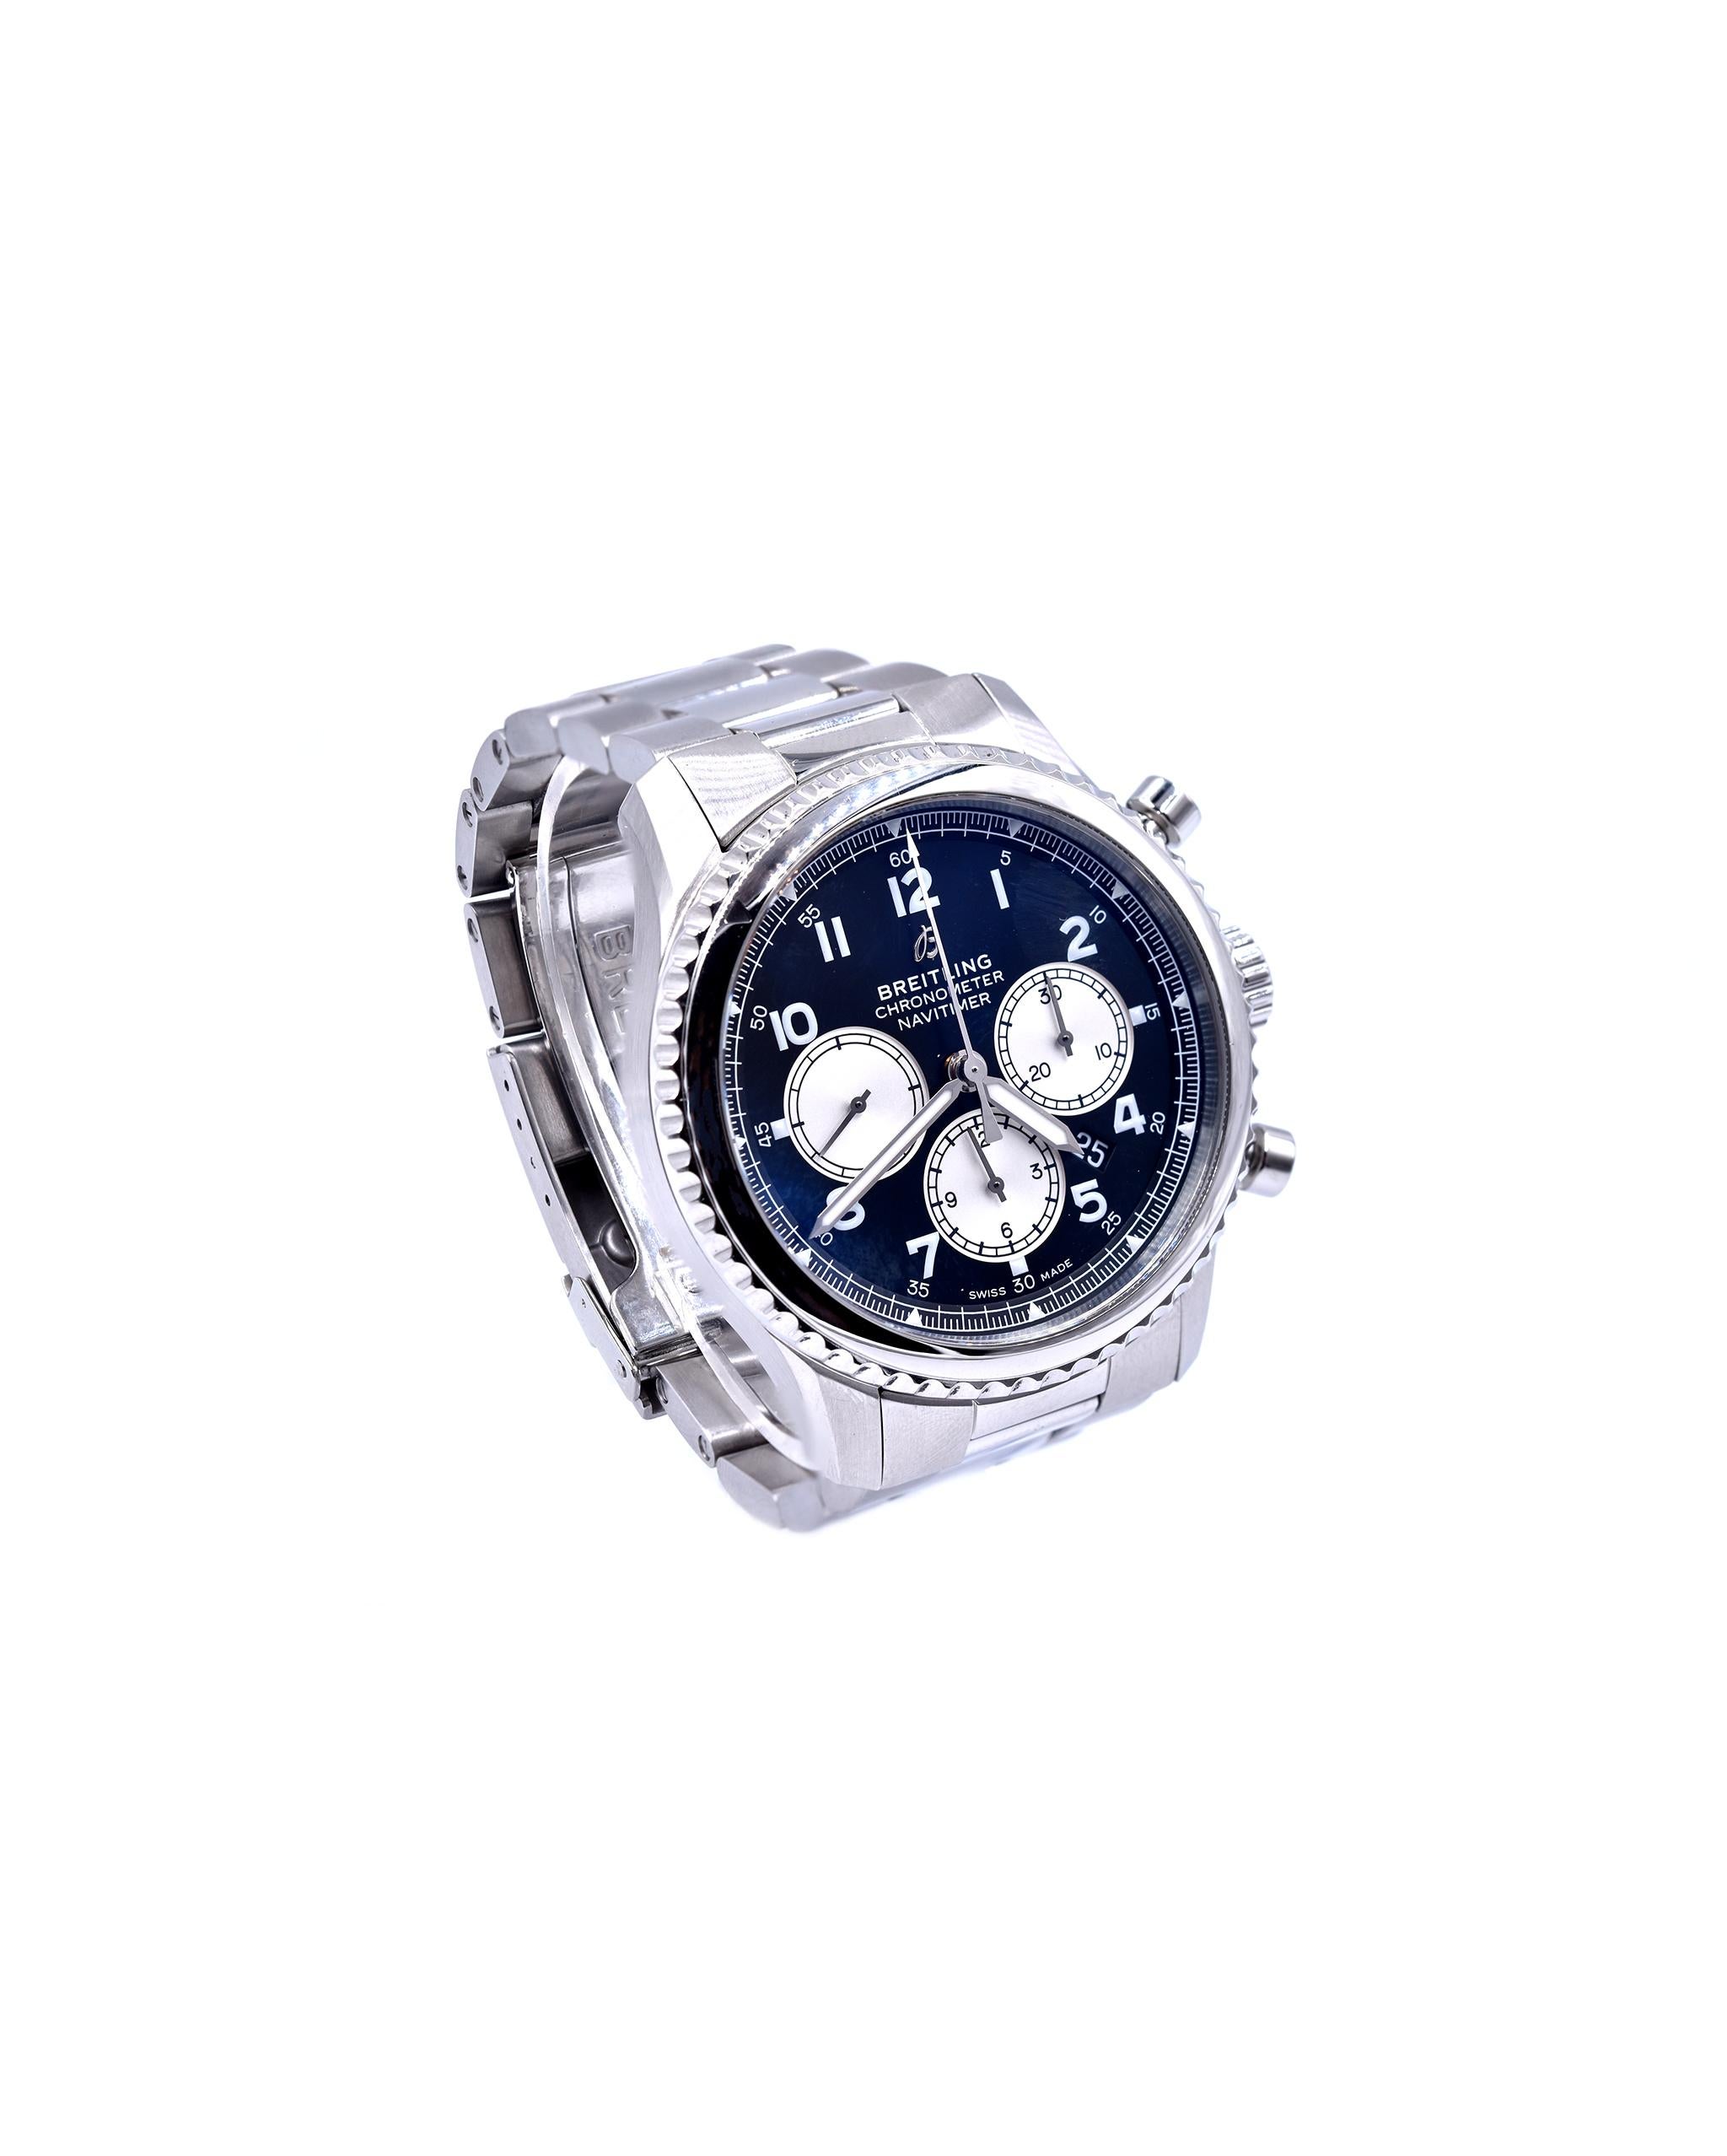 Designer: Breitling
Movement: automatic
Function: hours, minutes, small seconds, chronograph
Case: round 37mm stainless steel case, scratch resistant sapphire crystal, water resistant to 300m
Dial: silver dial, luminescent hands, yellow arabic